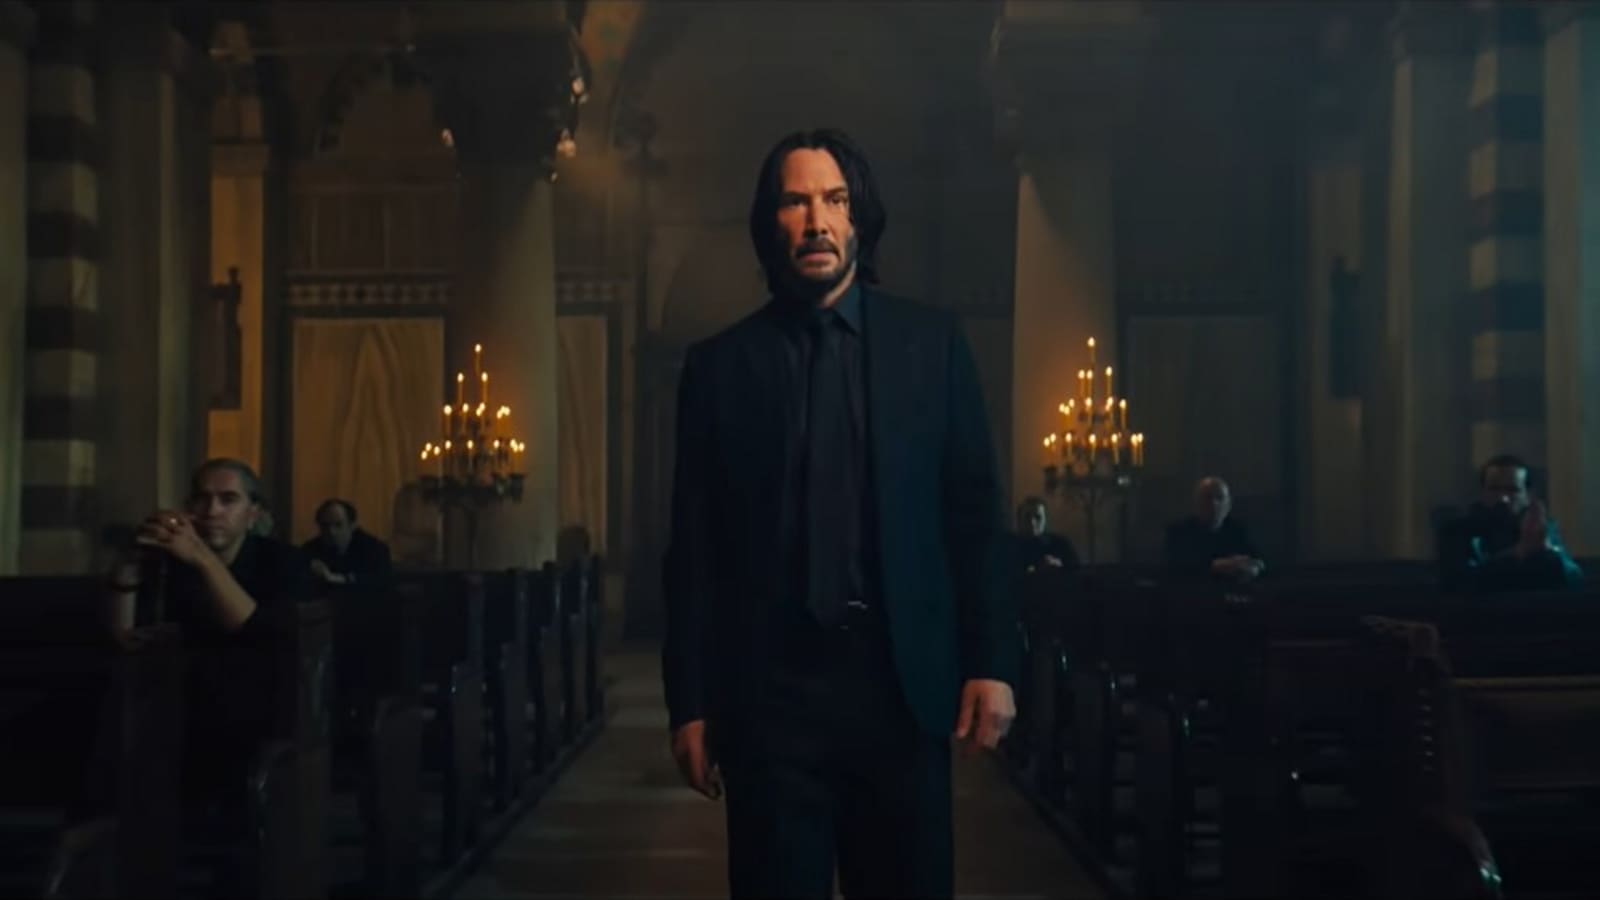 How to Watch John Wick: Chapter 4 – Showtimes and Streaming Status